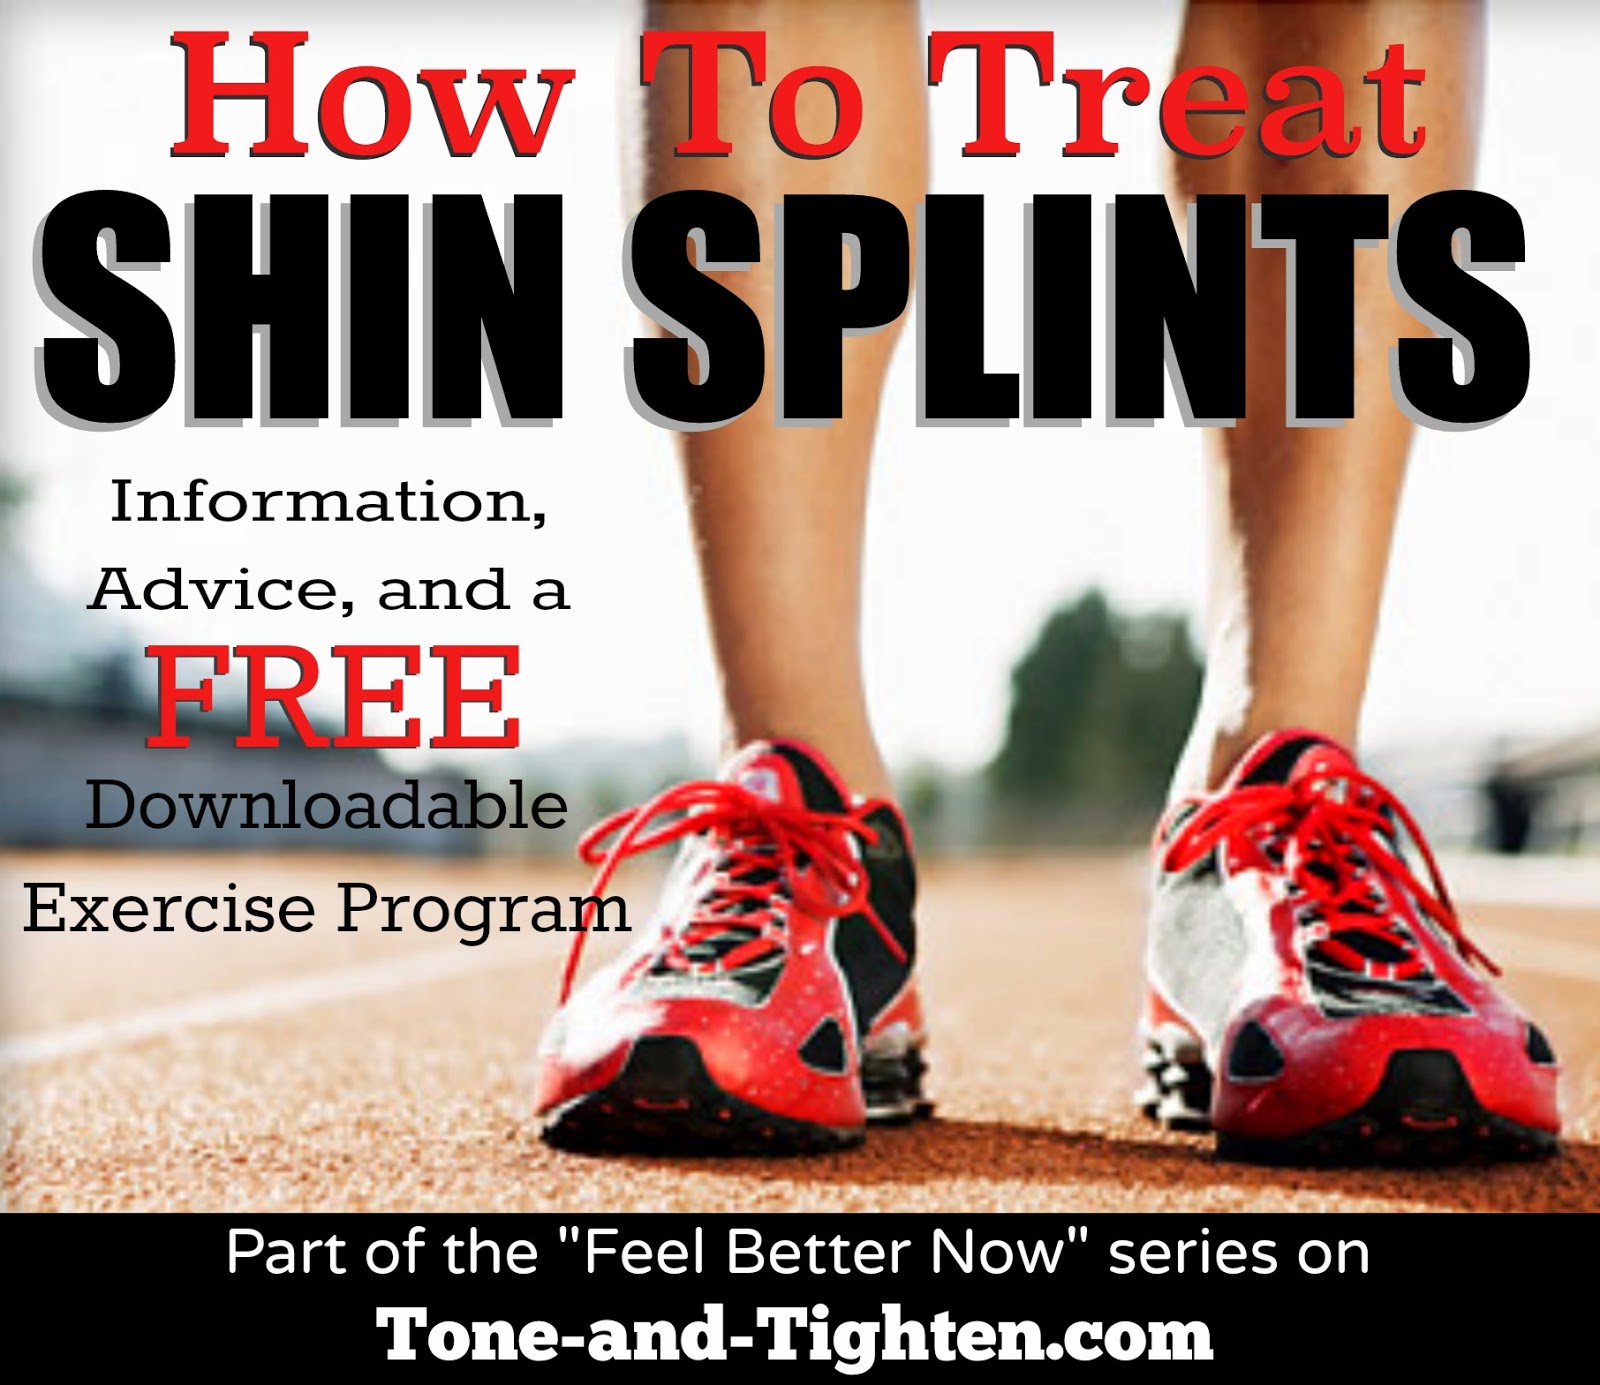 Best treatment for shin splints PART 2 – “Feel Better Now” series on Tone-and-Tighten.com